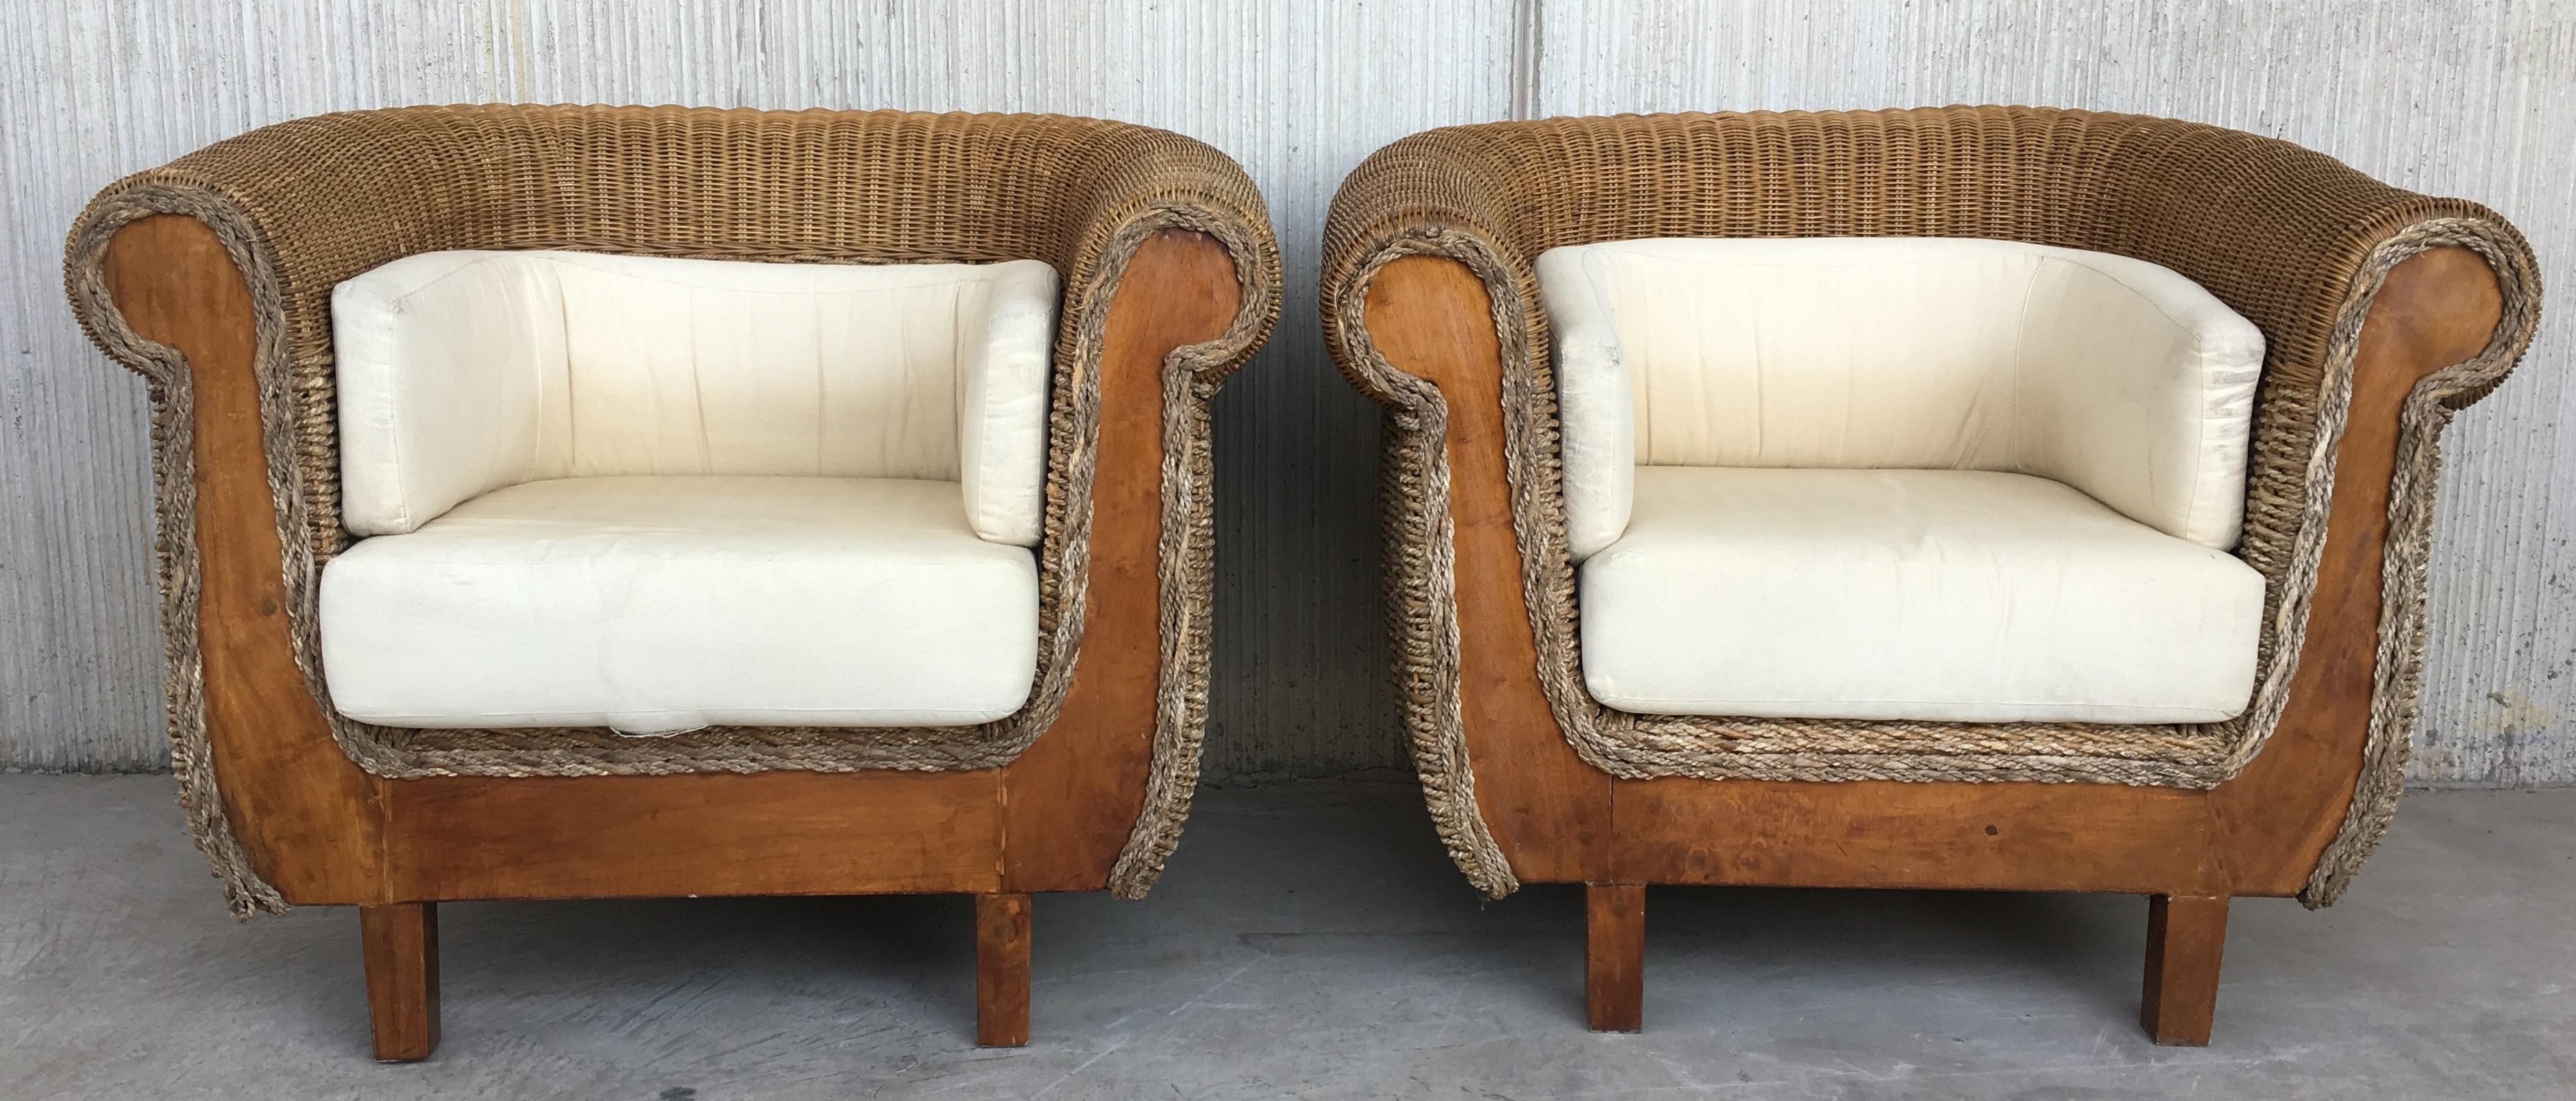 Mid-Century Modern Midcentury Set of Big Armchairs with Matching Coffee Table, Rattan and Wood For Sale